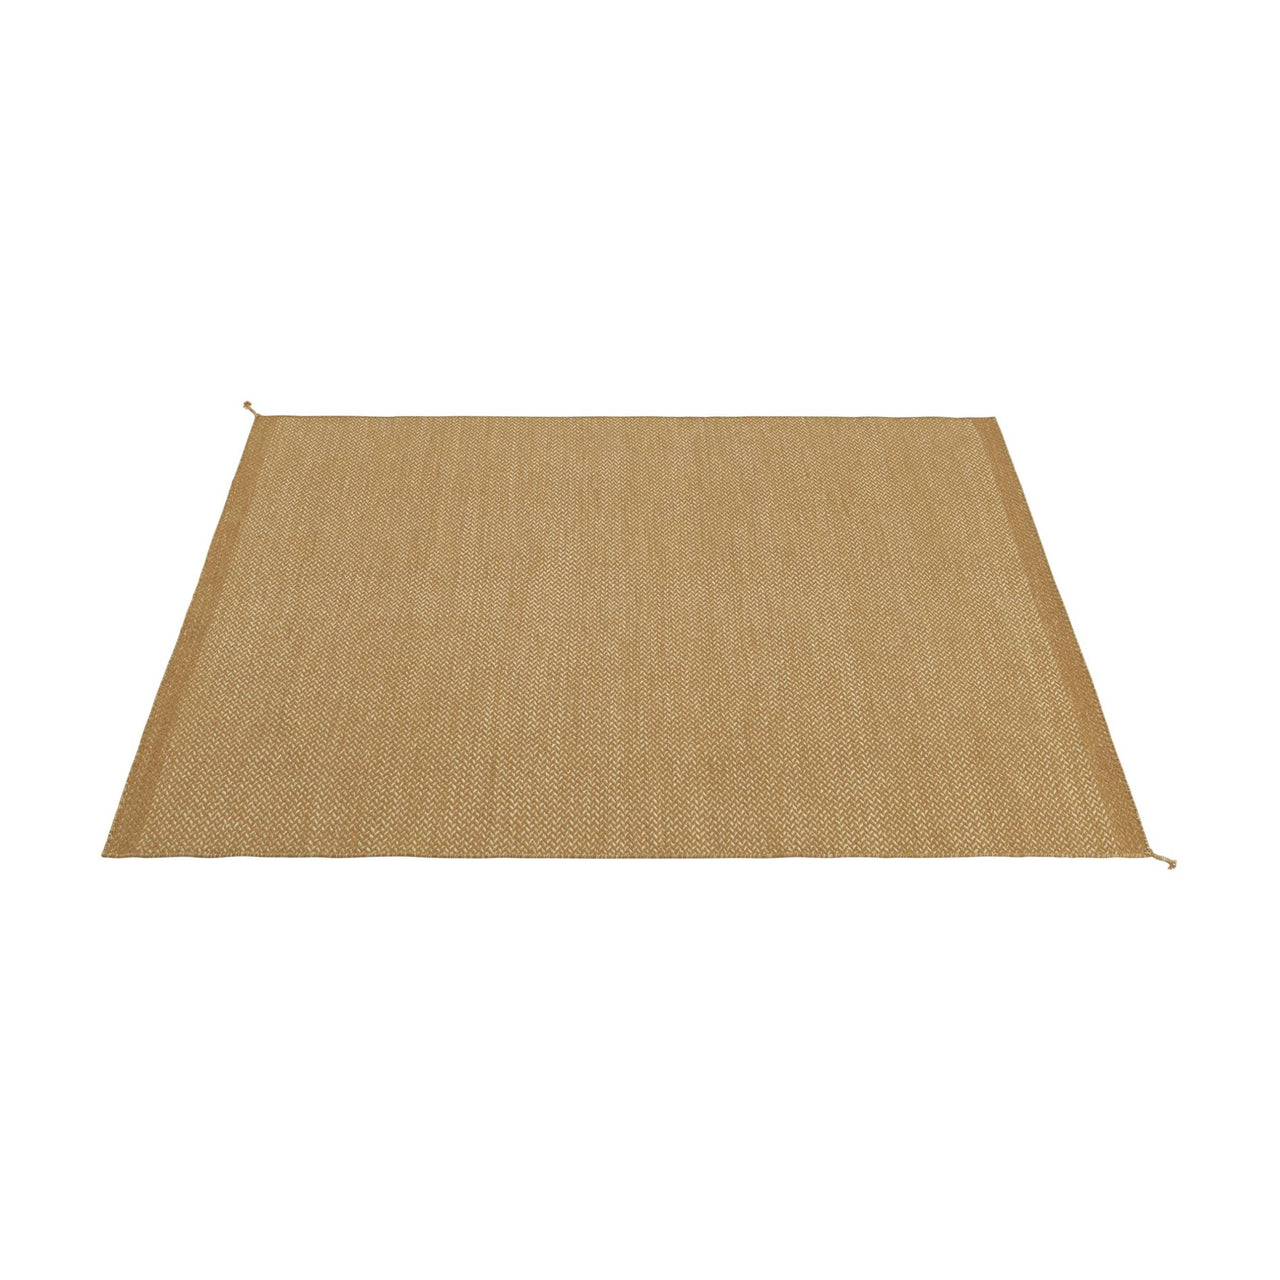 Ply Rug: Large - 118.1